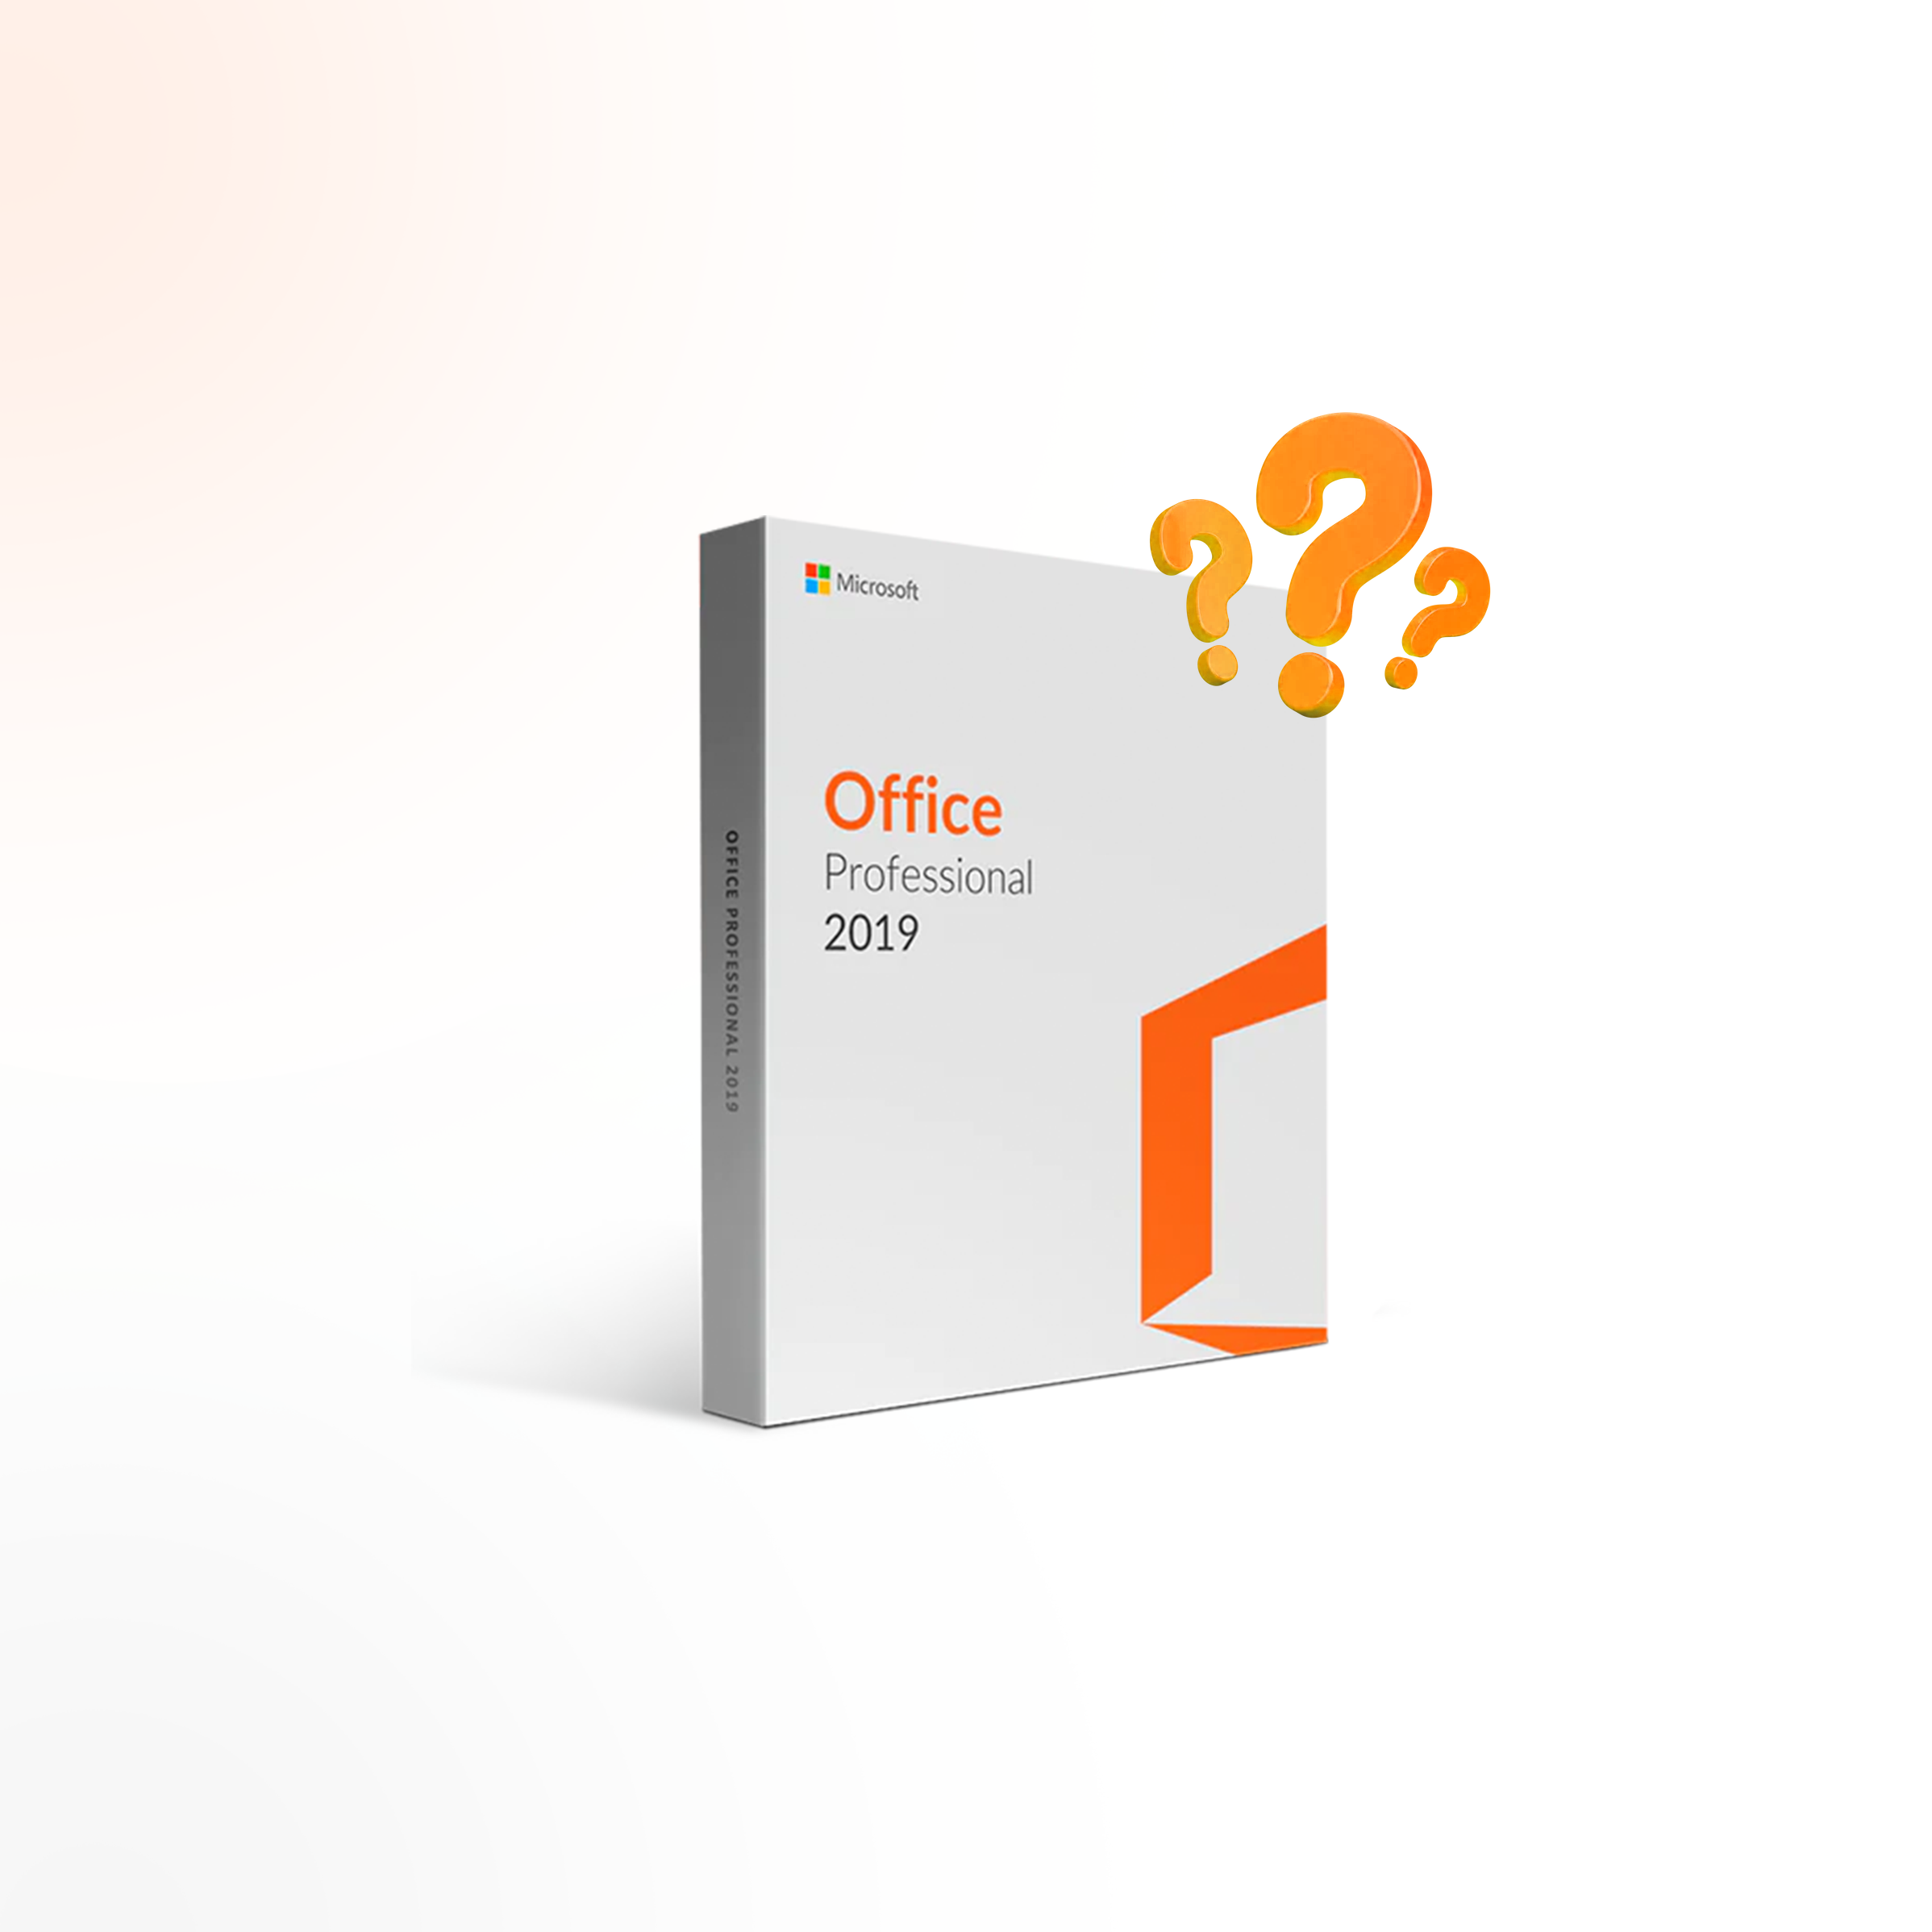 Microsoft Office 2019 – What’s Next and What to Expect